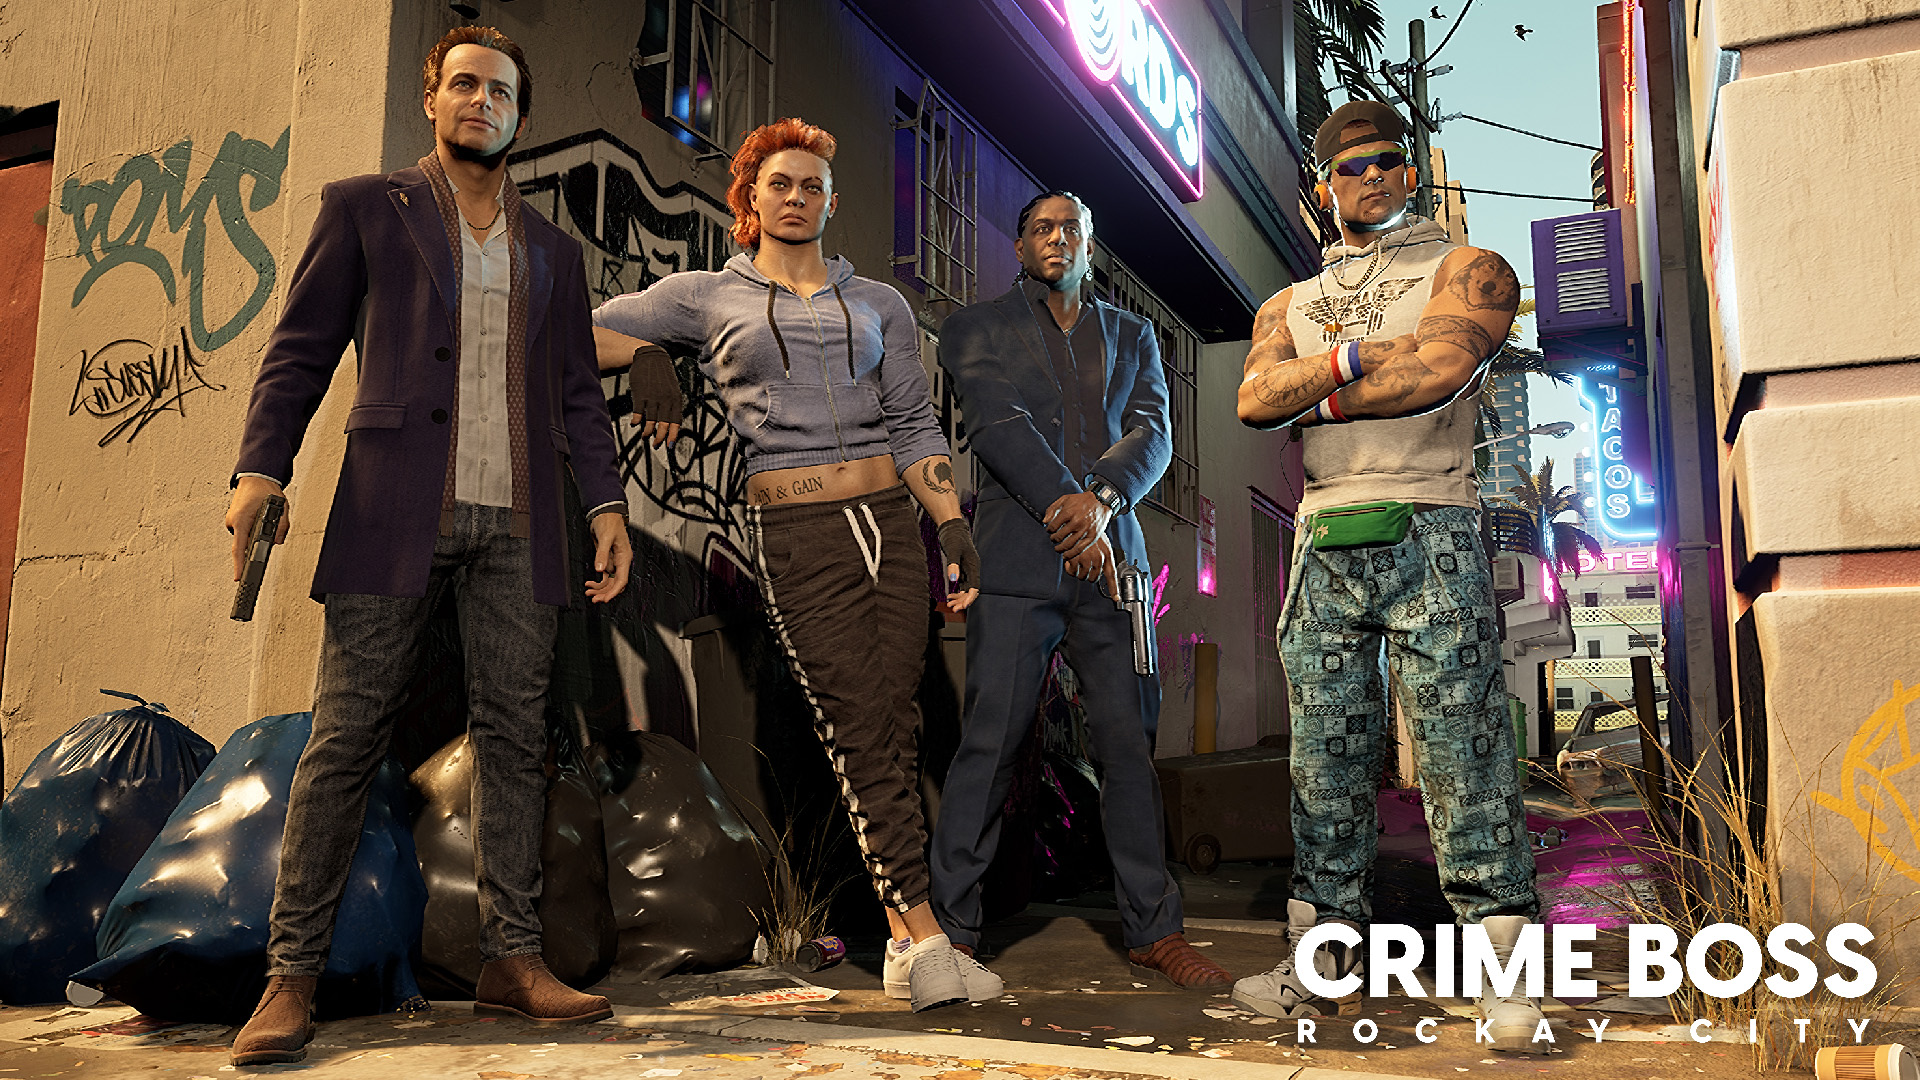 Crime Boss: Rockay City how Ropes, Jupiter, Runaway and the gang found themselves in Rockay City